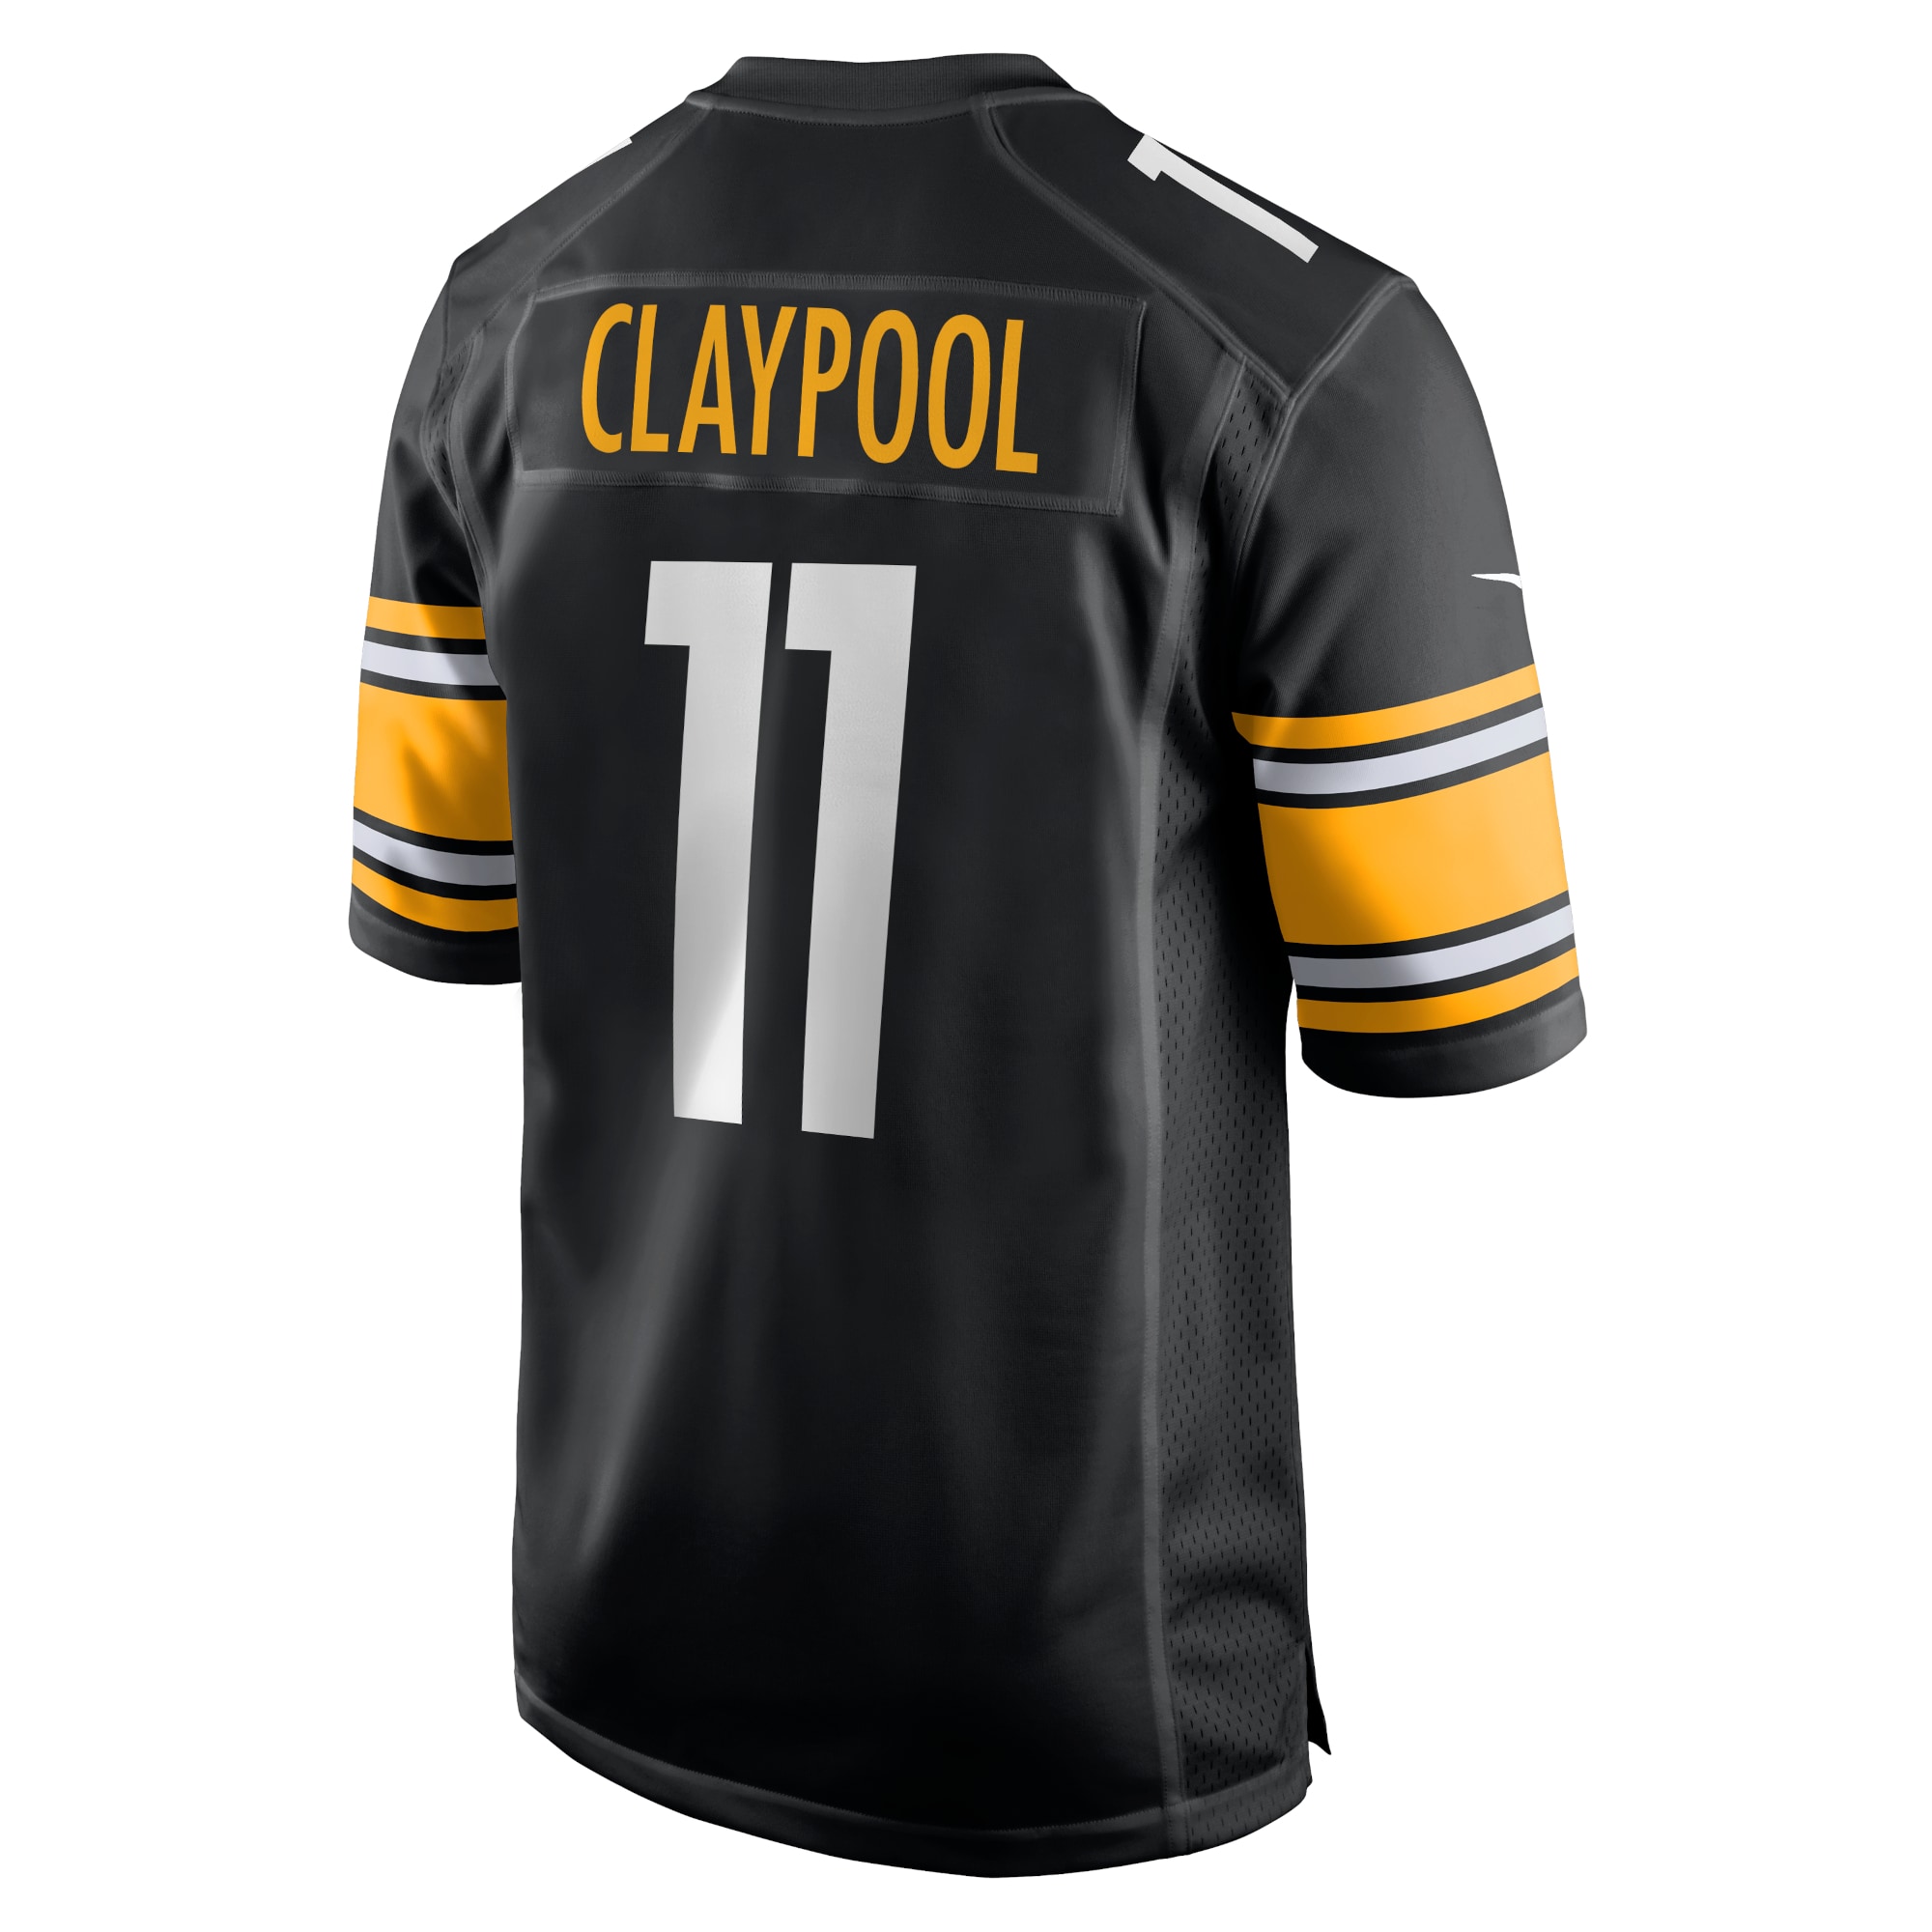 Men's Pittsburgh Steelers Jerseys Black Chase Claypool Game Team Style